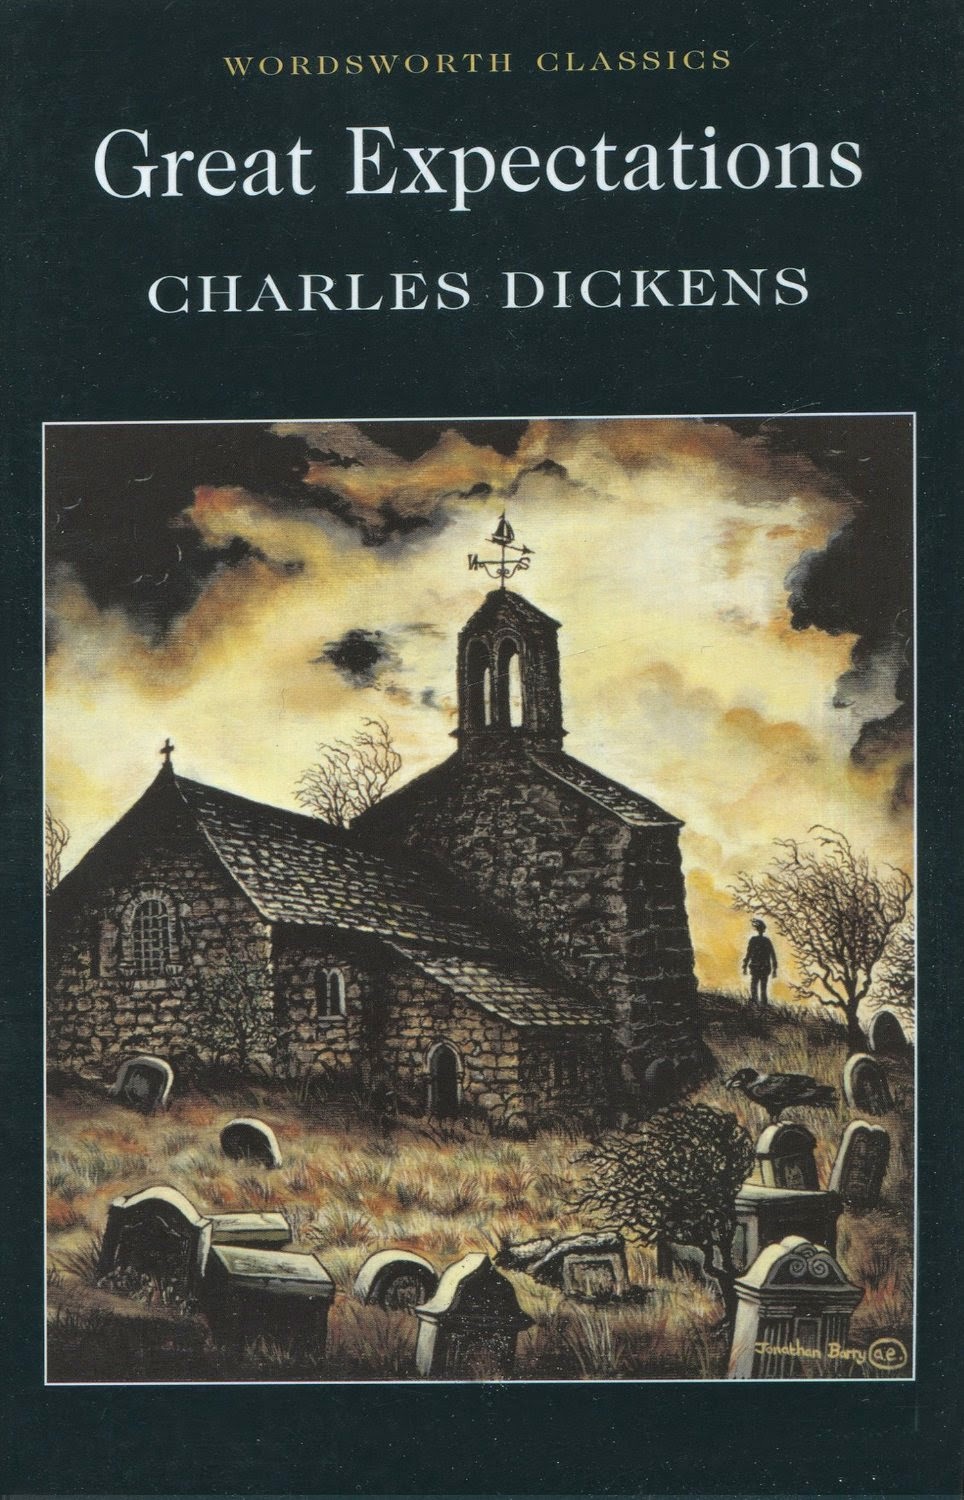 Great Expectations by Charles Dickens PDF Free Download